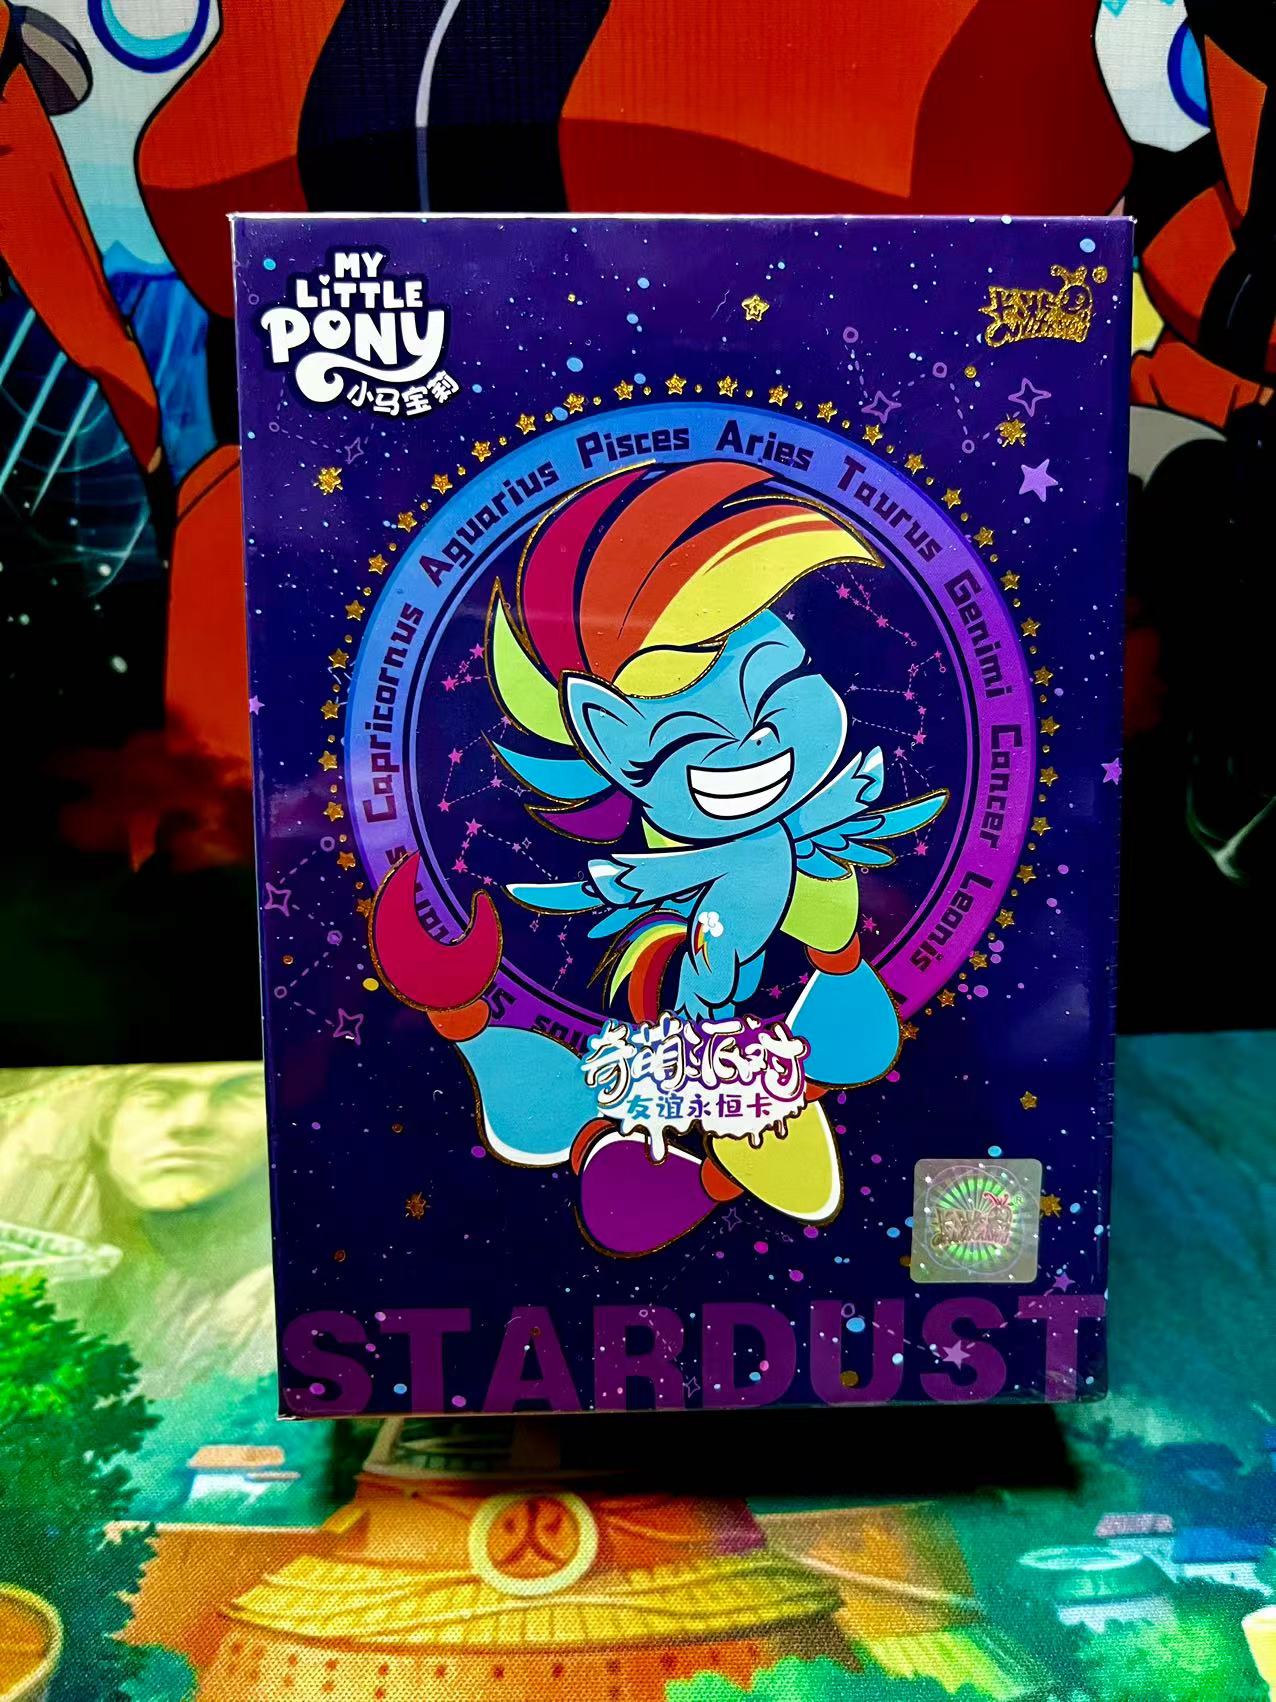 Booster-Kayou My Little Pony Box Collection Card